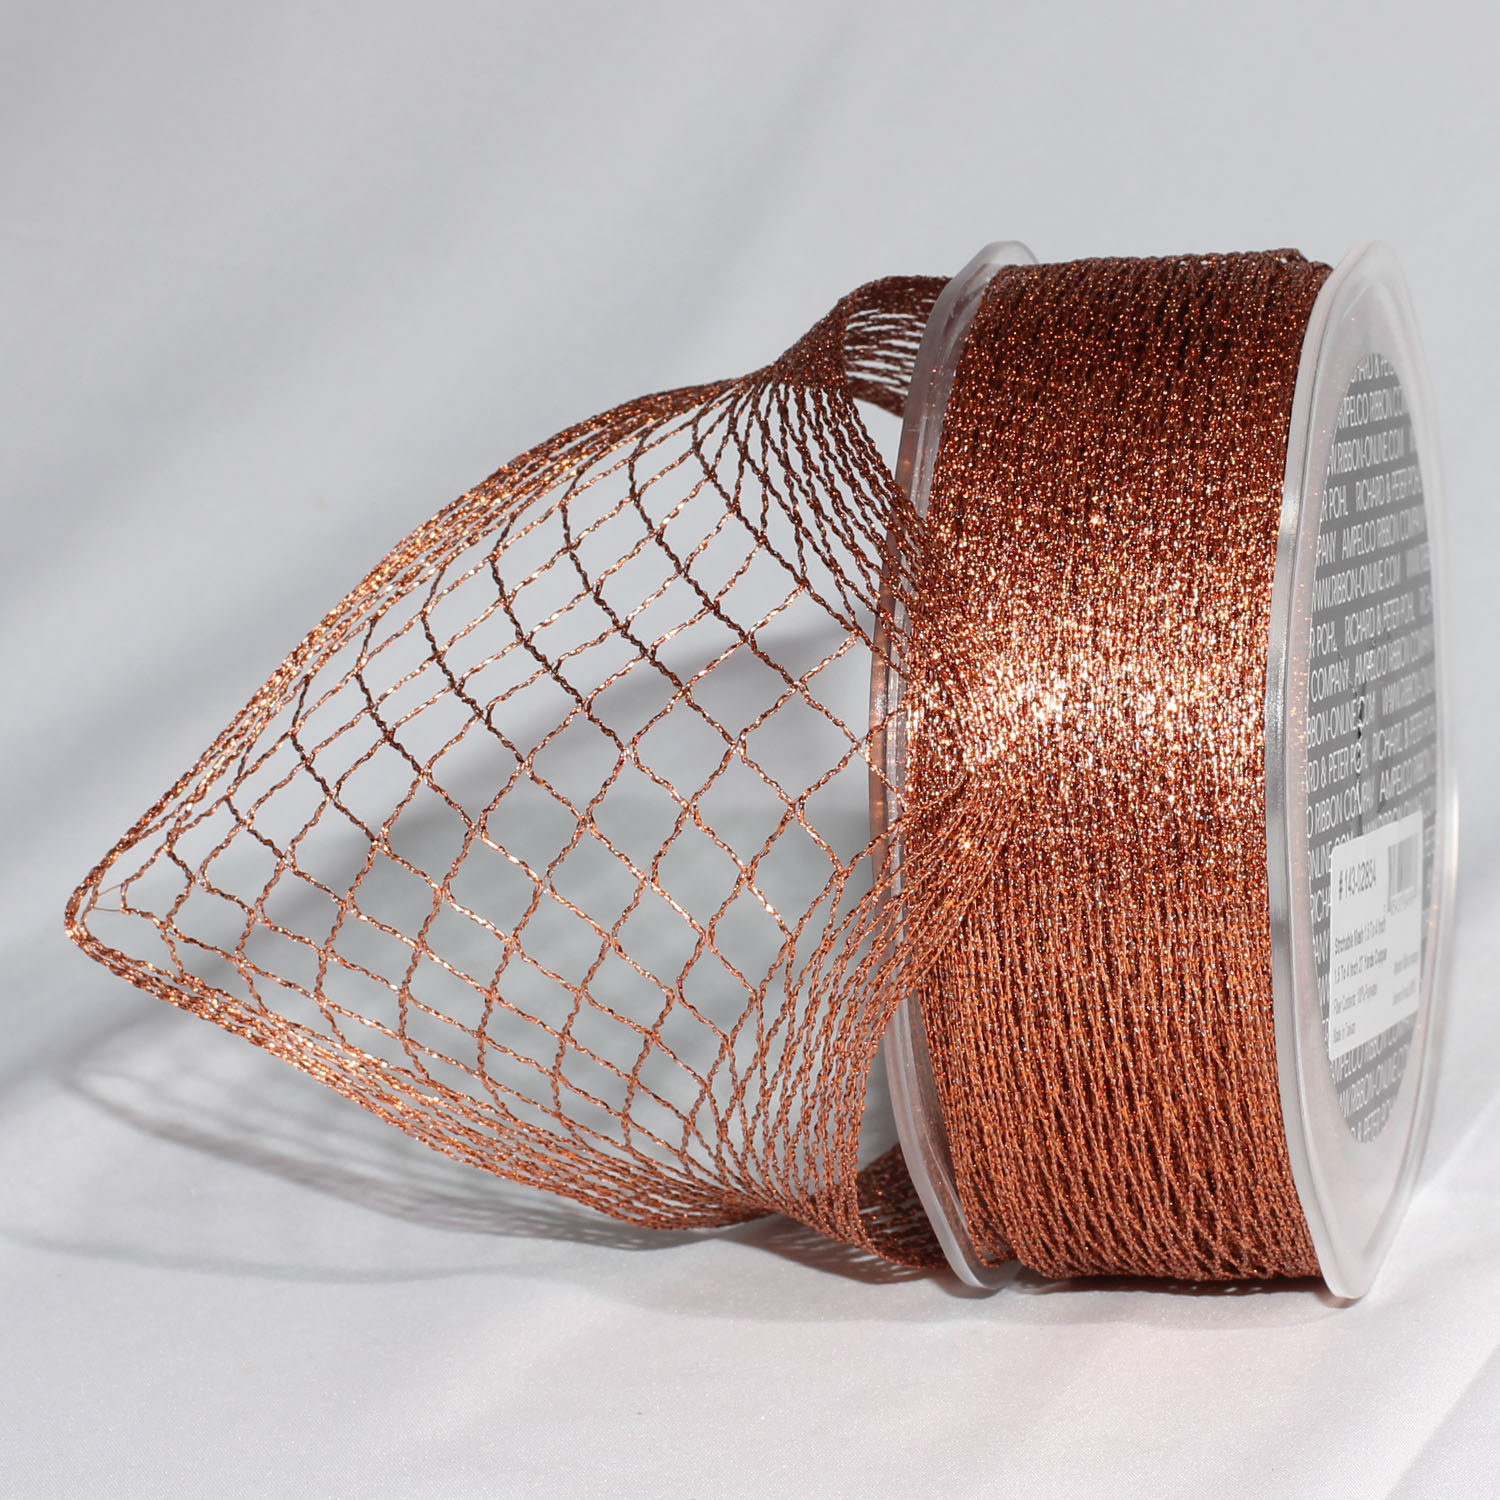 The Ribbon People Copper Stretchable Mesh Craft Ribbon 1.5" to 4" x 27 Yards